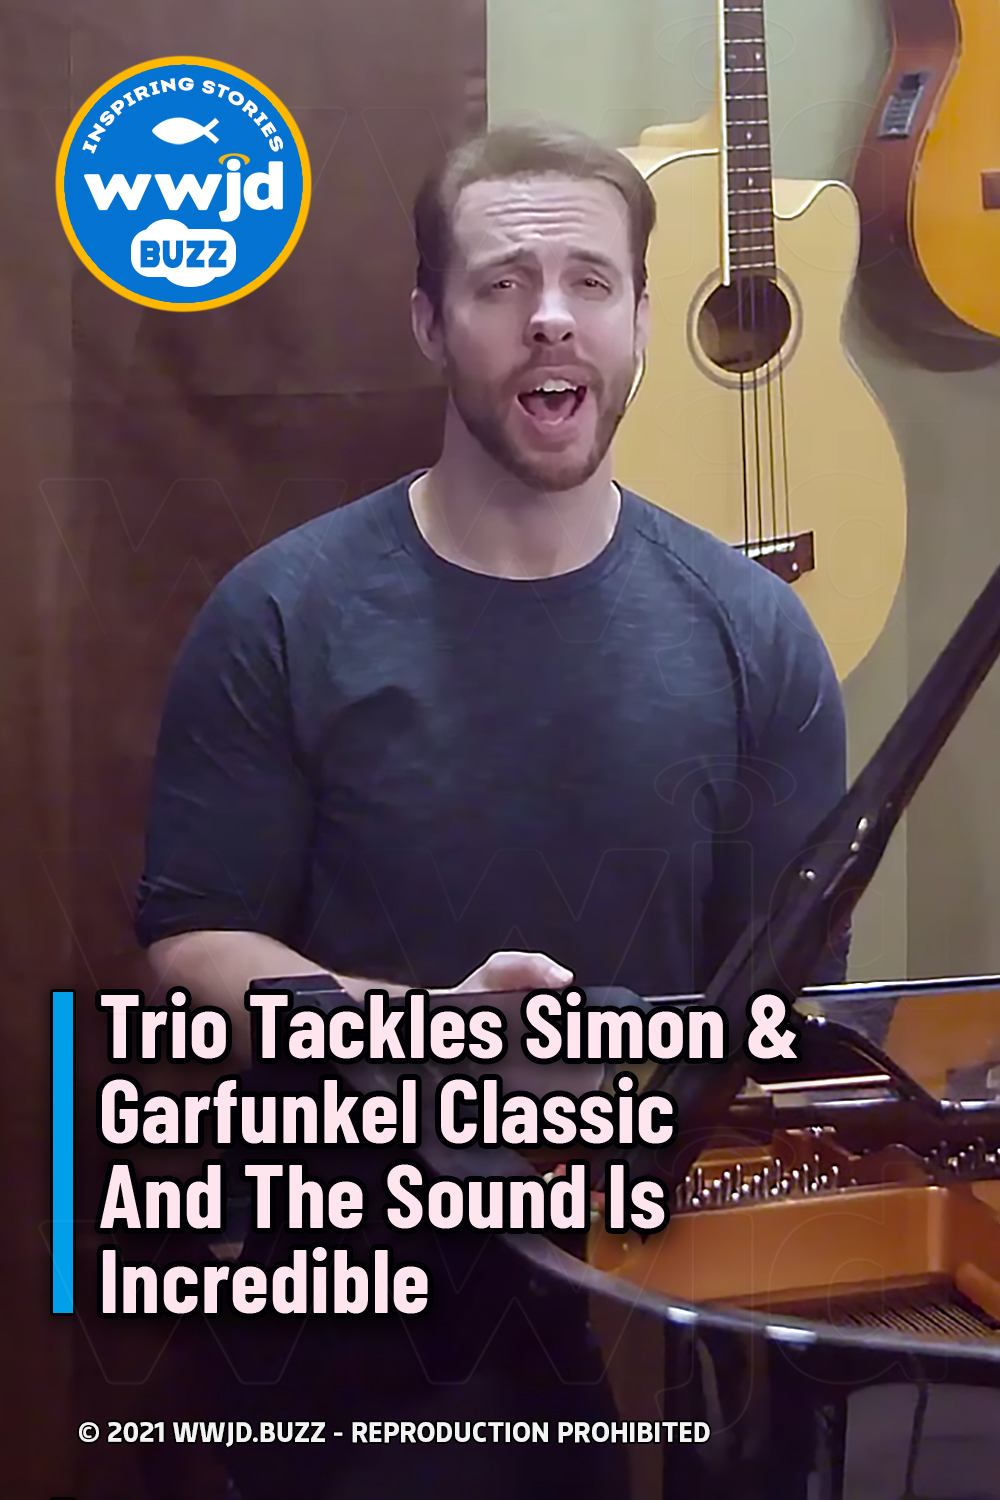 Trio Tackles Simon & Garfunkel Classic And The Sound Is Incredible